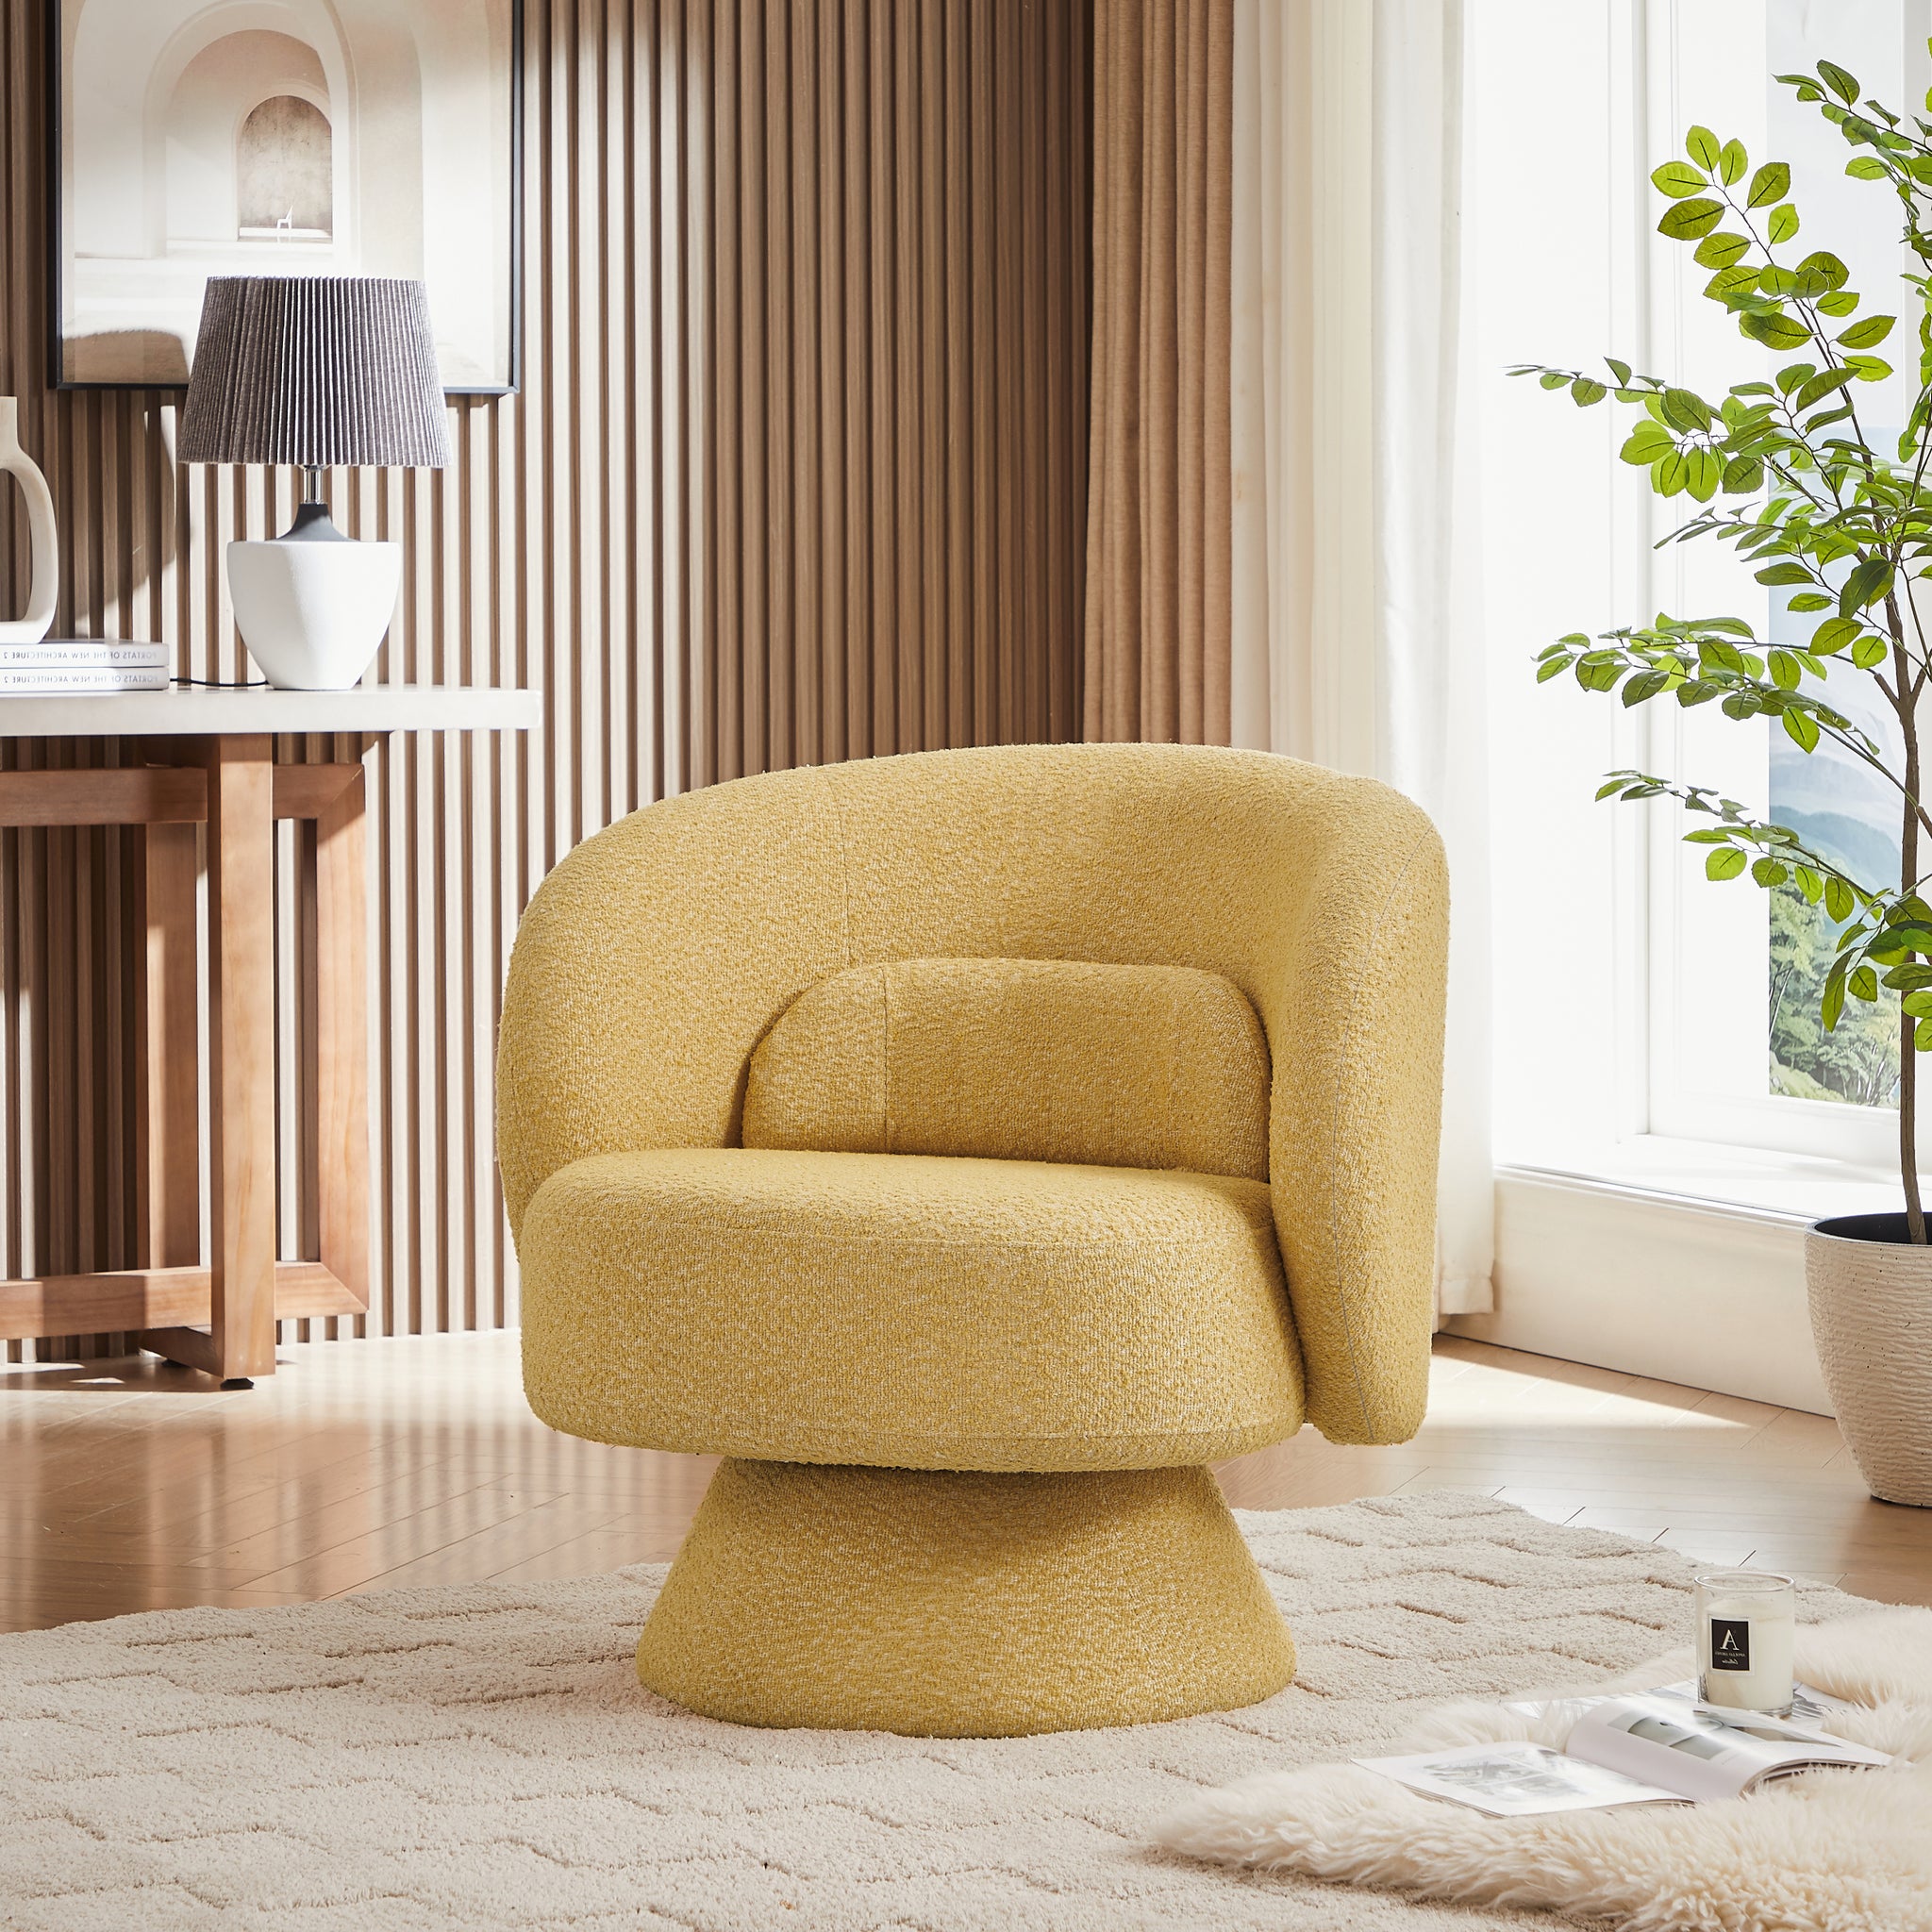 360 Degree Swivel Sherpa Accent Chair Modern Style yellow-primary living space-foam-fabric